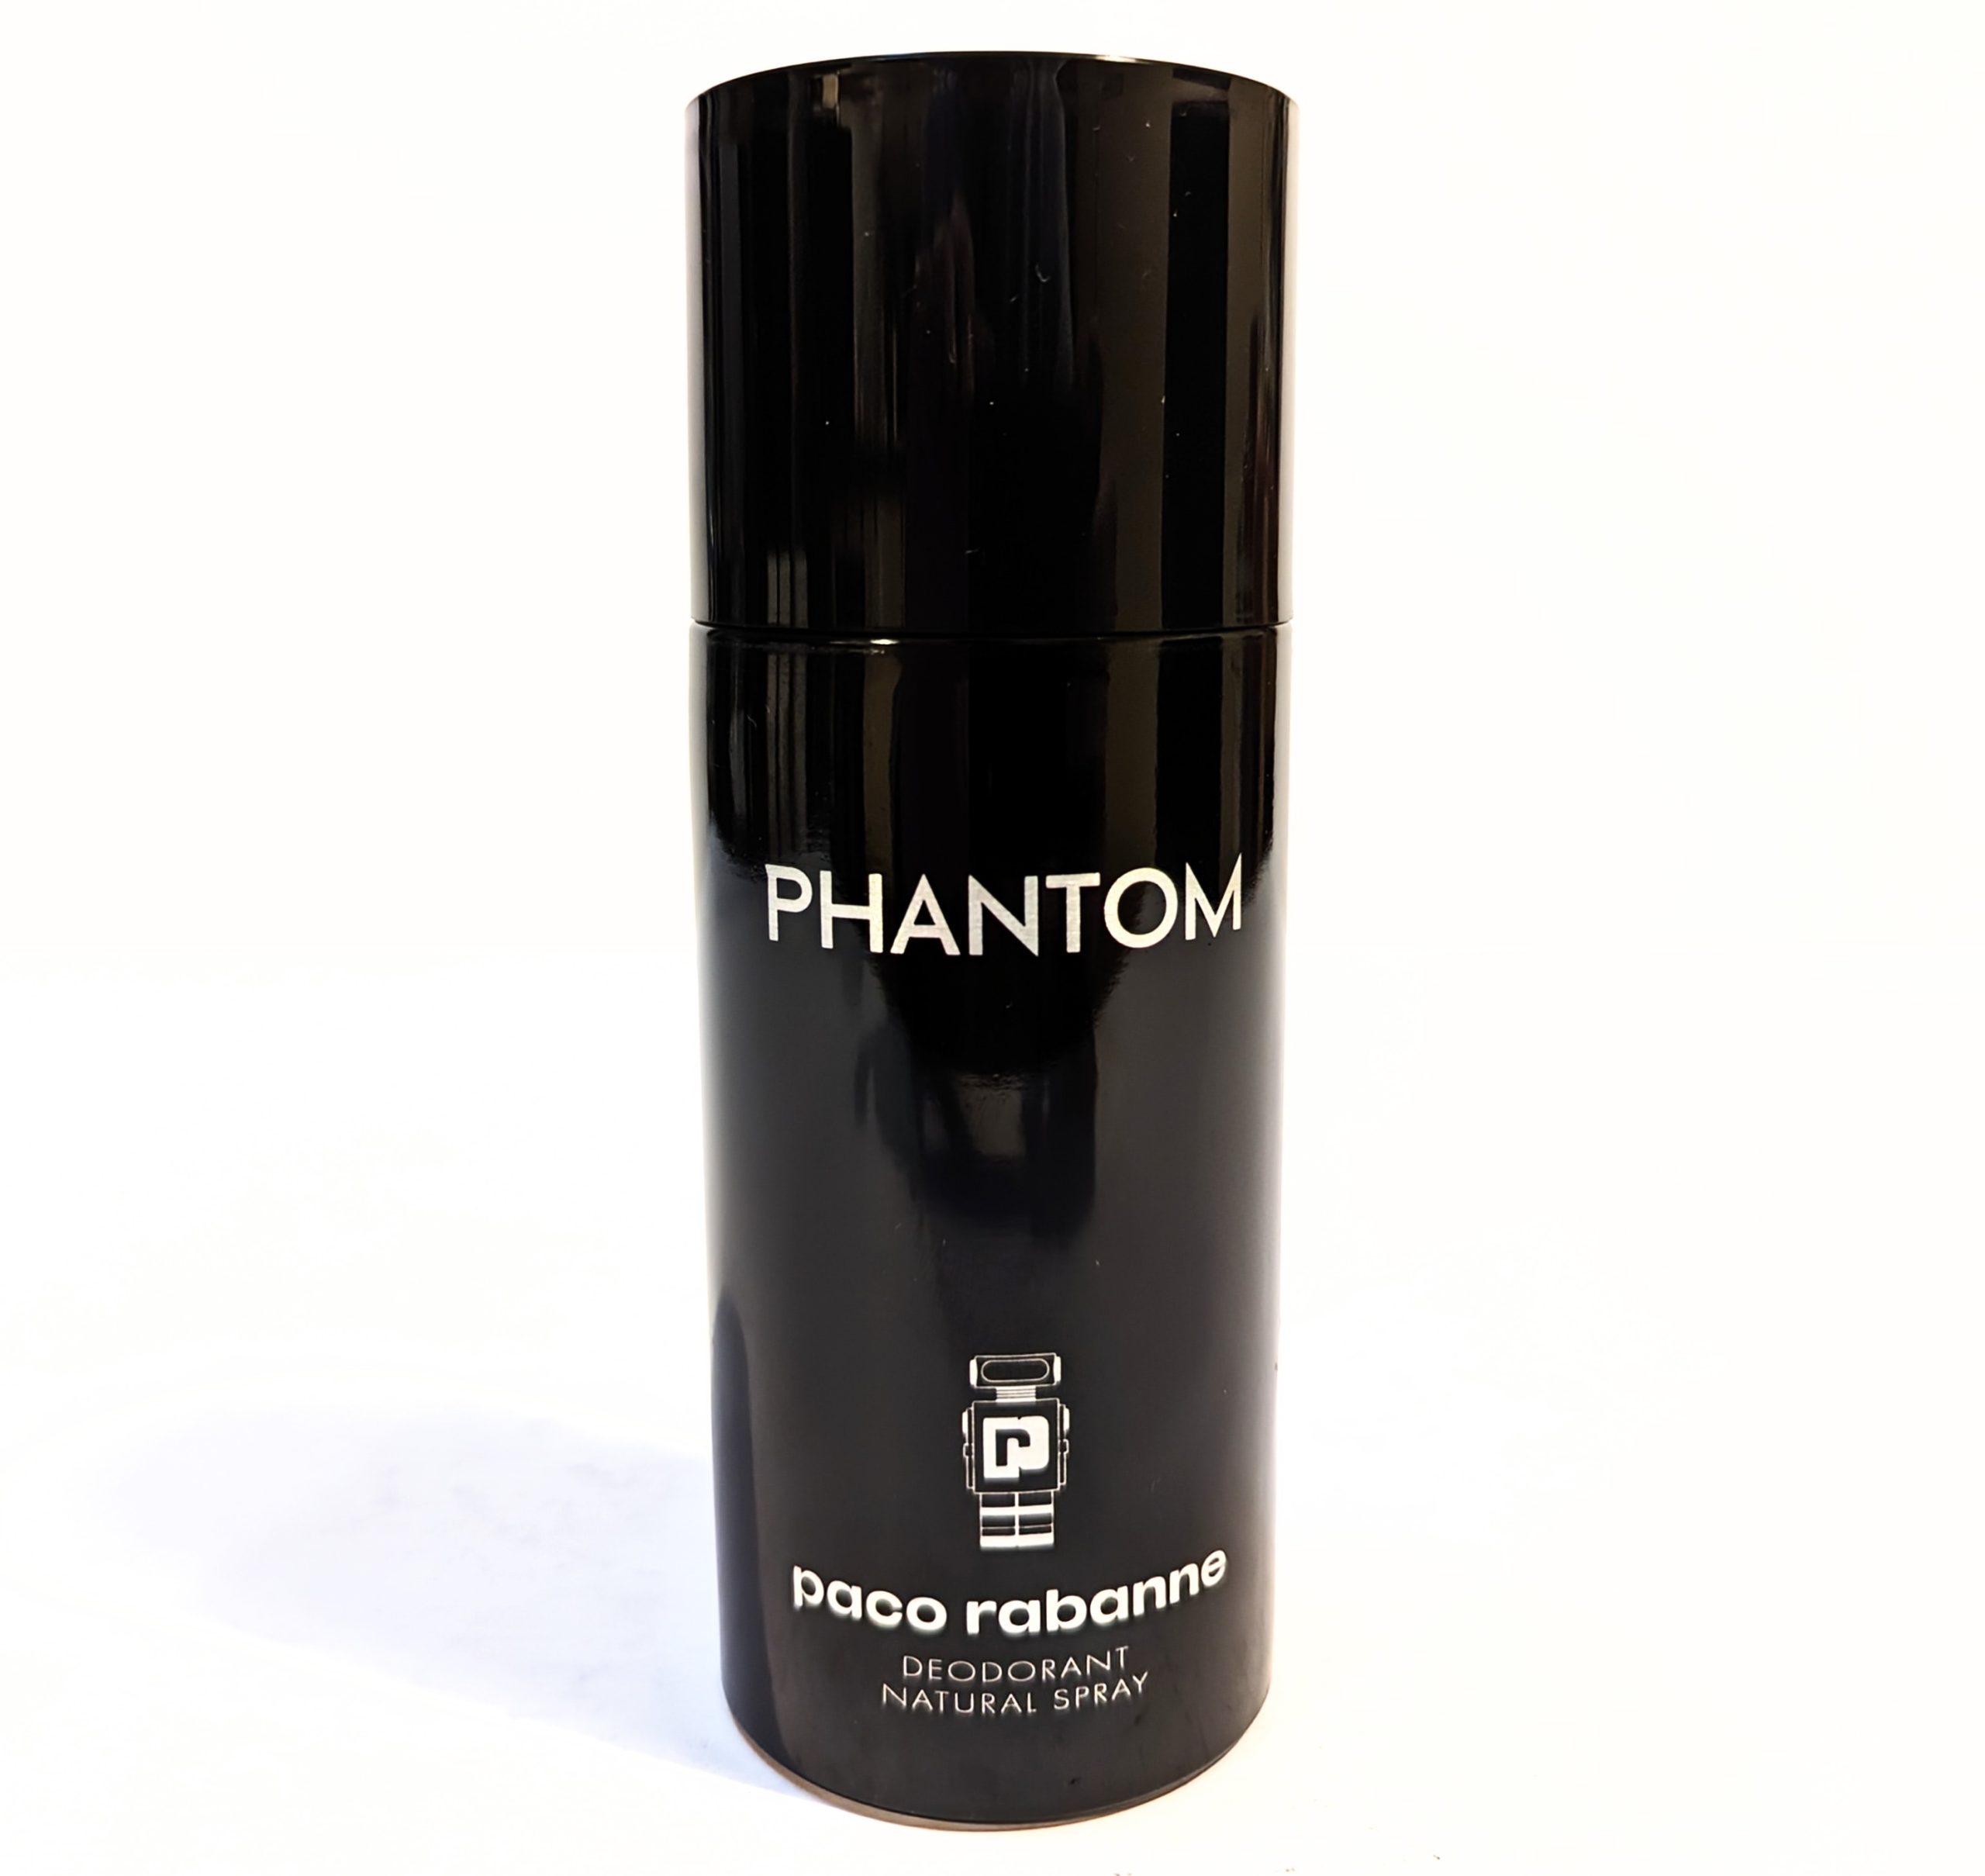 A black cylindrical container of Paco Rabanne Phantom deodorant natural spray, featuring a minimalist design with metallic silver text.